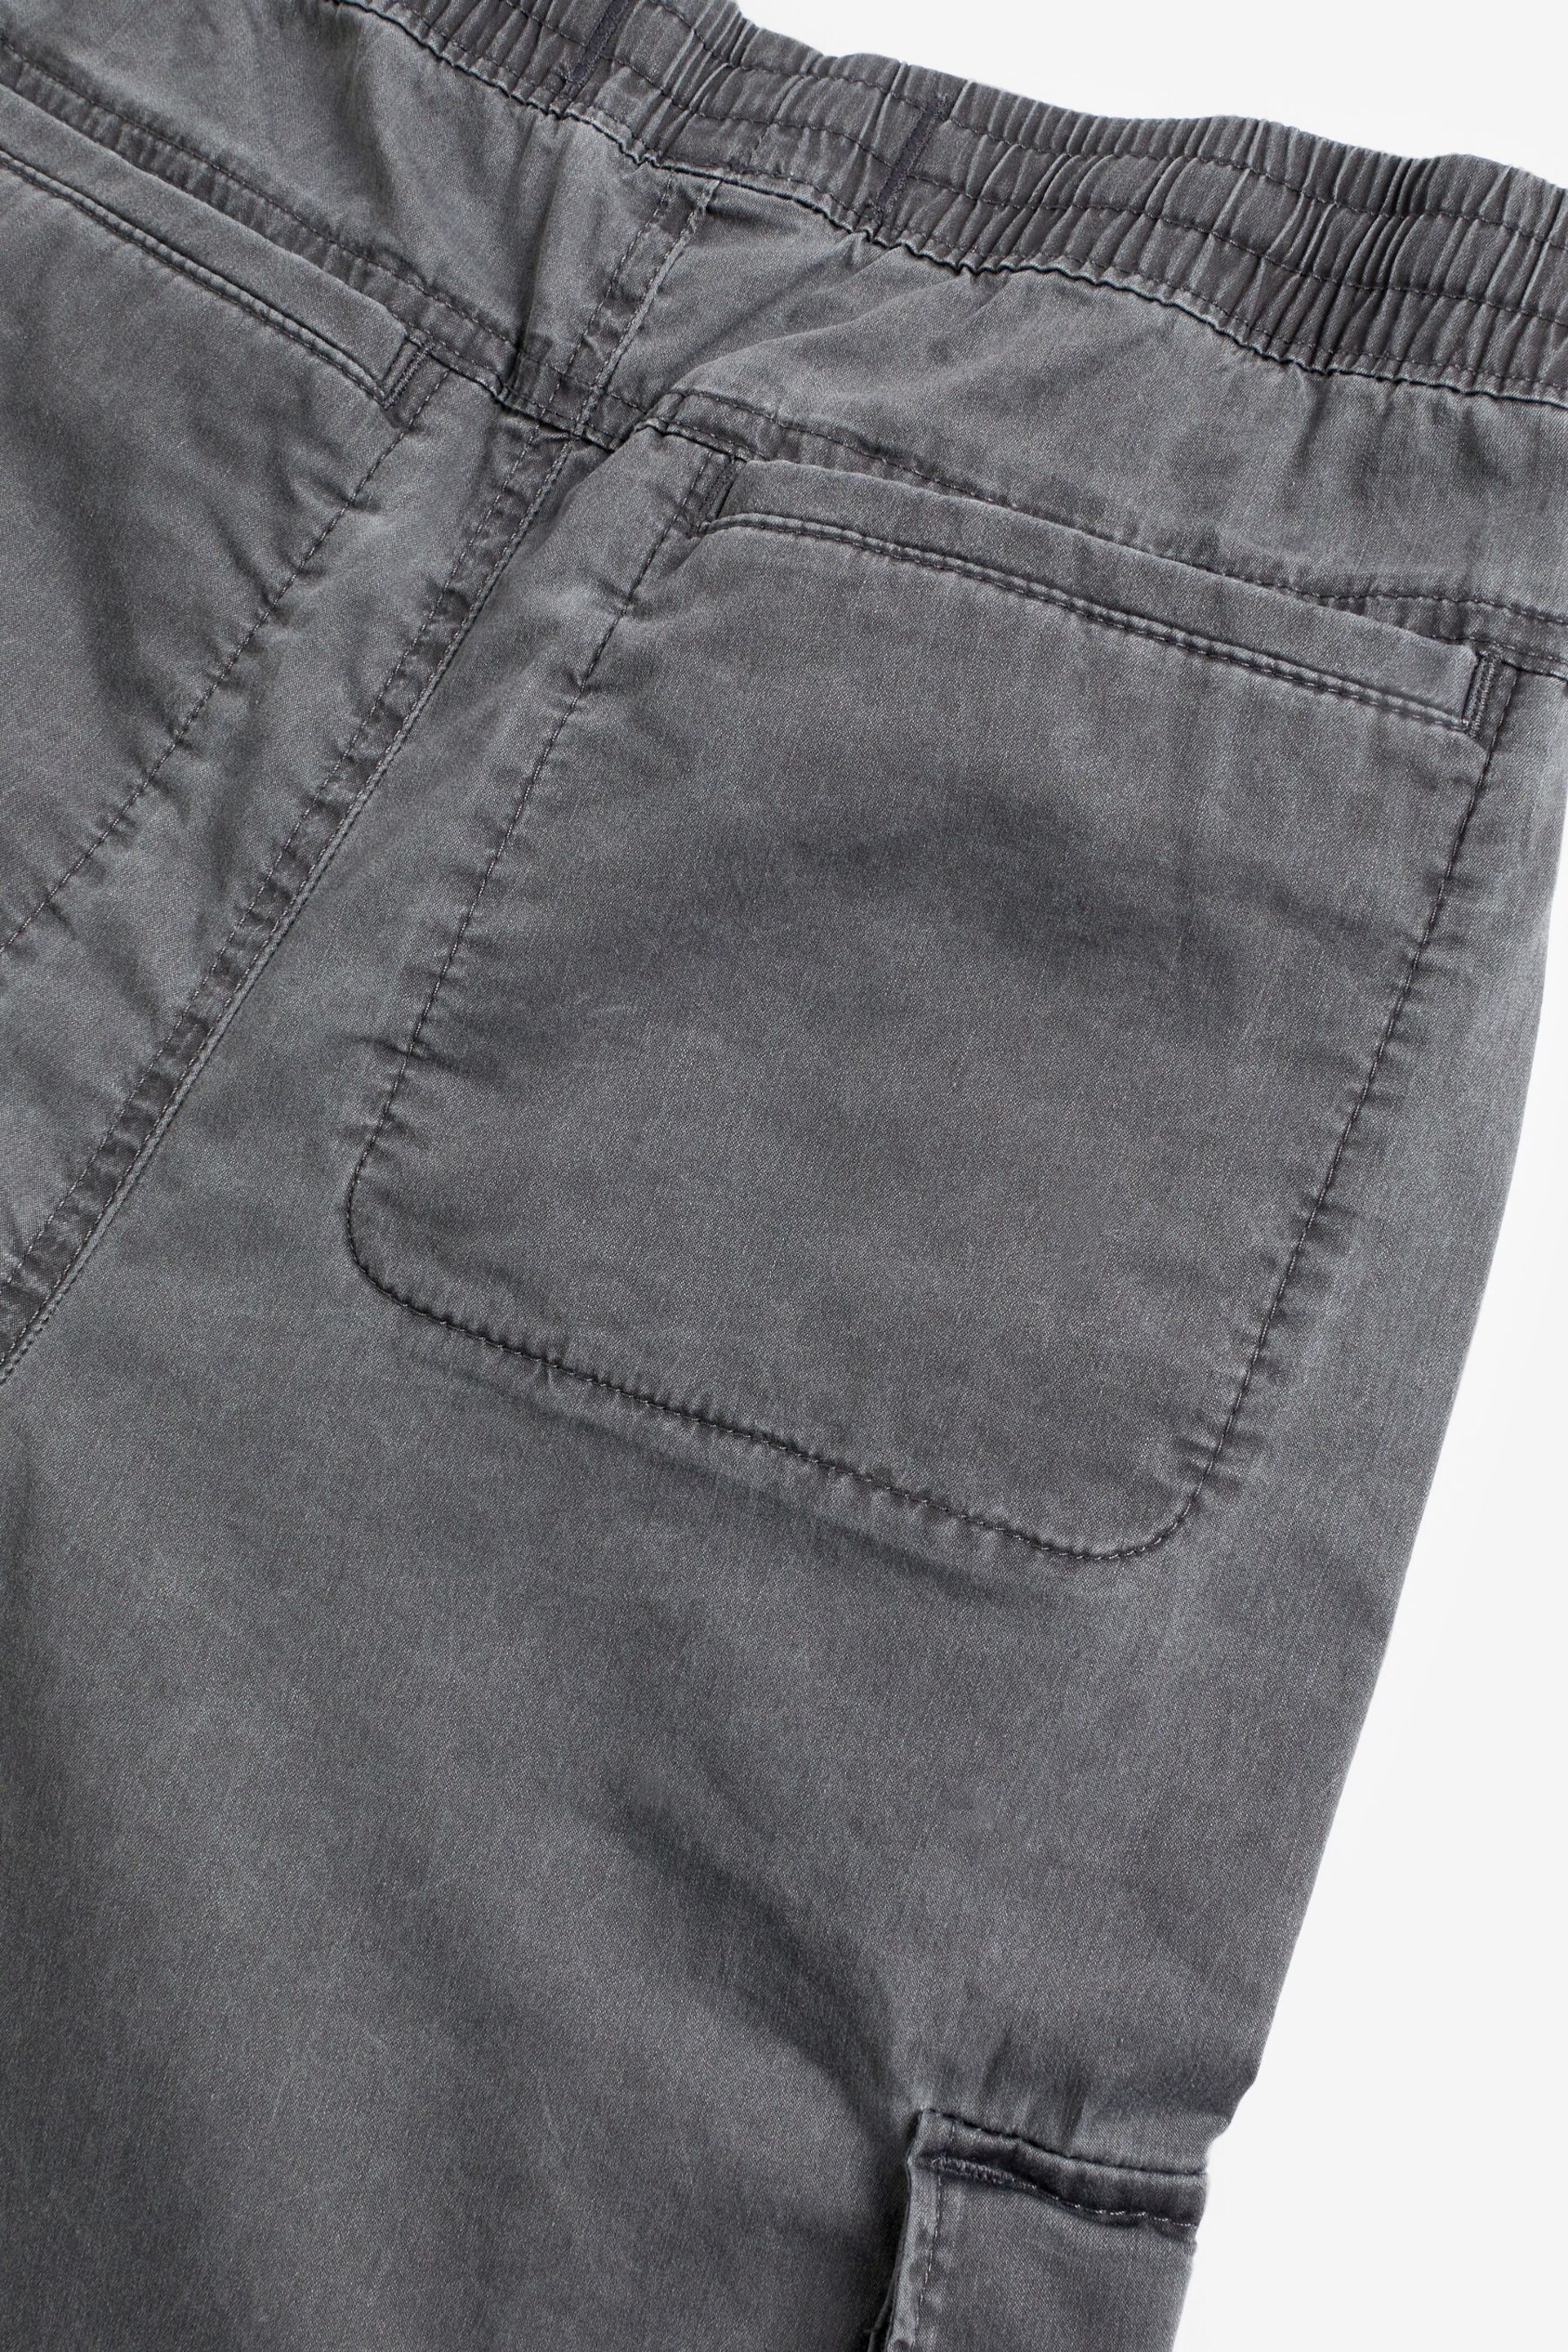 Abercrombie & Fitch Utility Cargo Black Trousers - Image 5 of 6